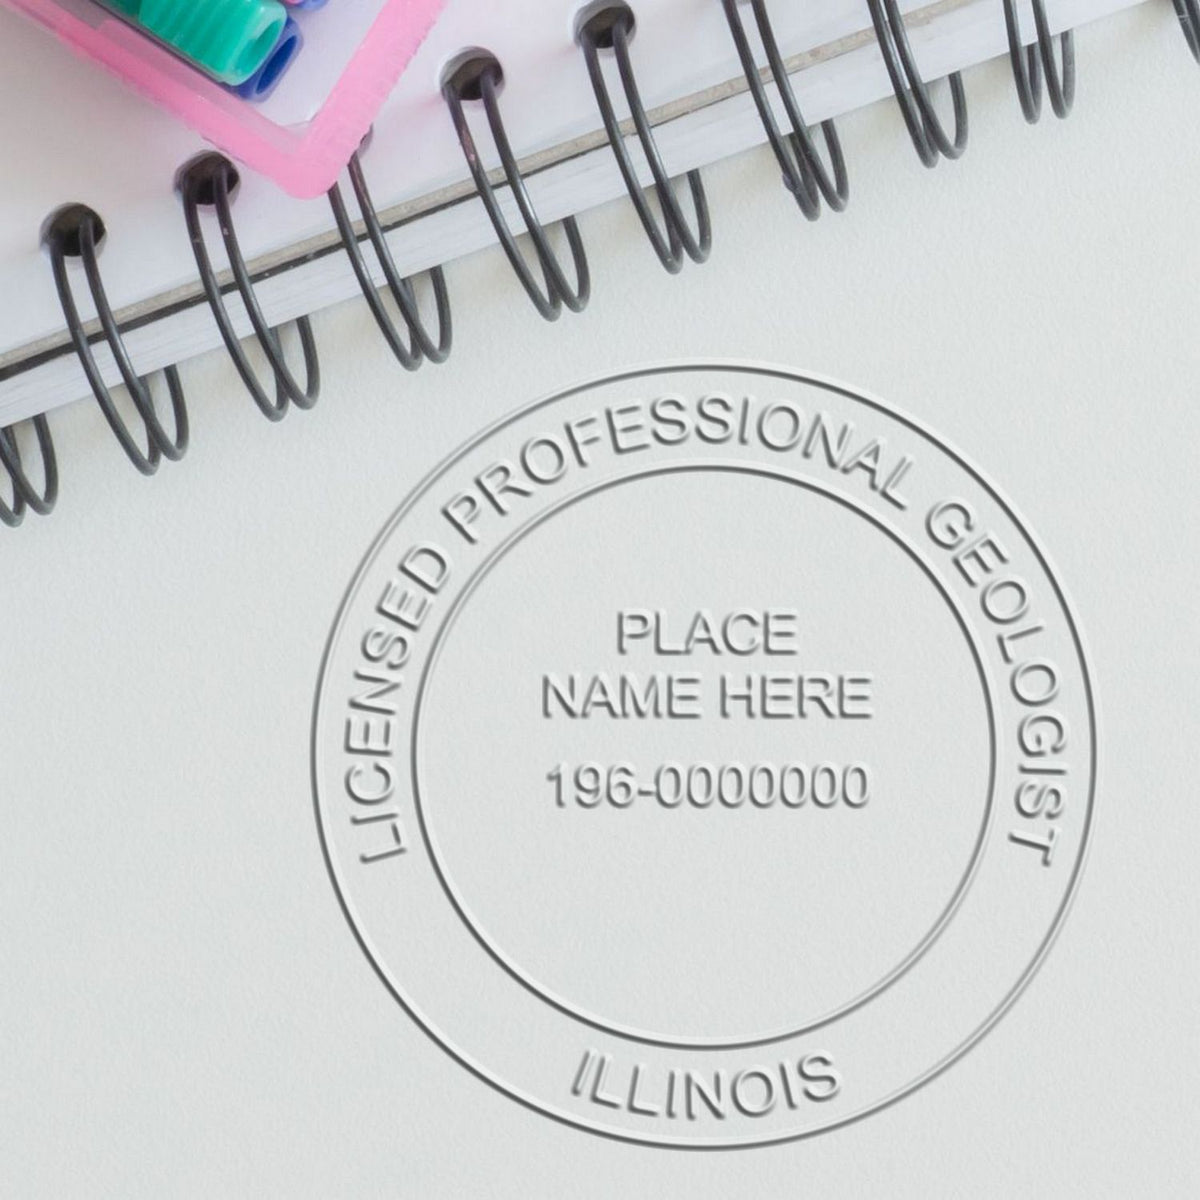 A photograph of the Gift Illinois Geologist Seal stamp impression reveals a vivid, professional image of the on paper.